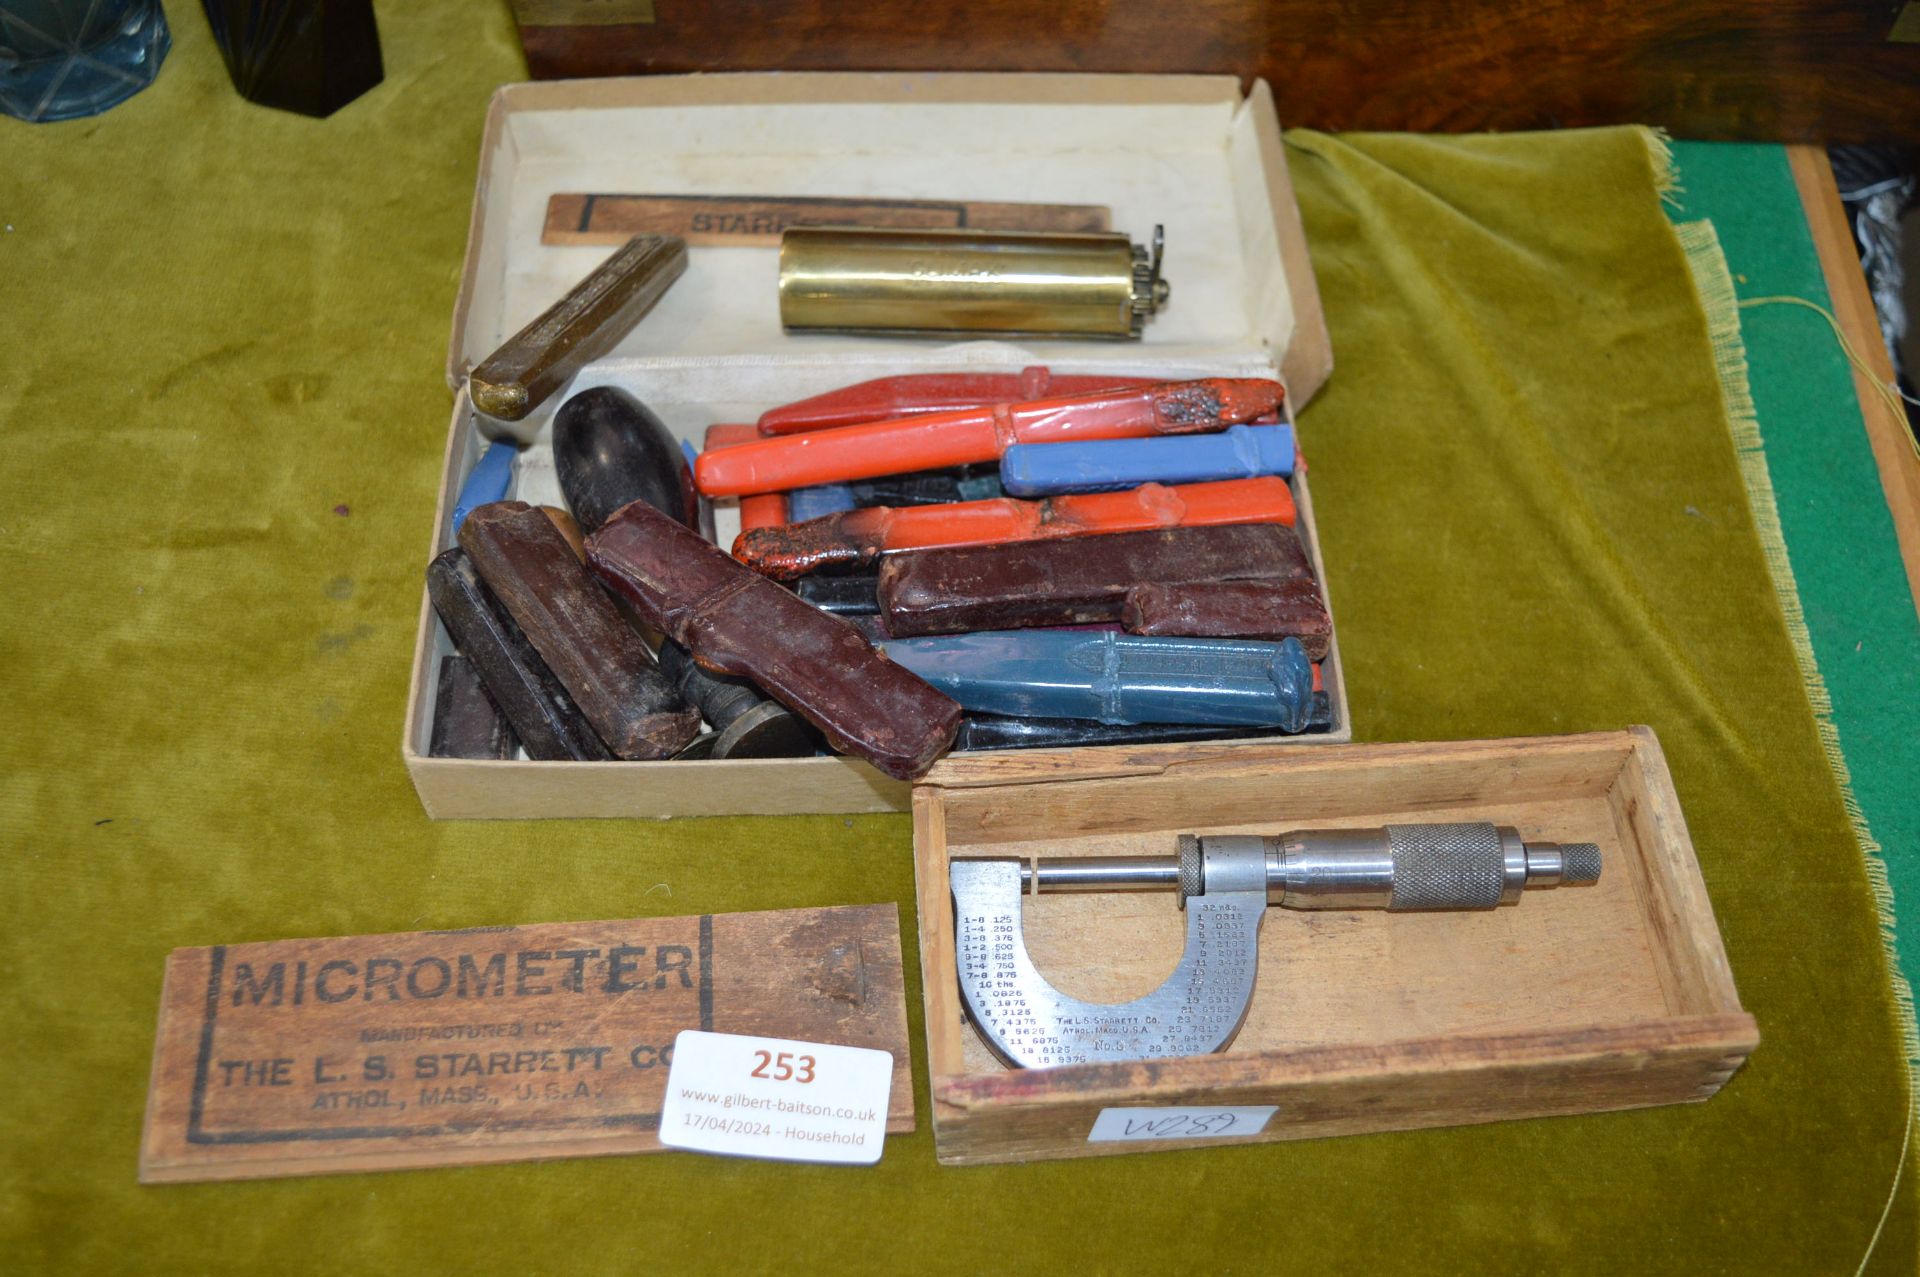 Wax Seals and a Micrometer